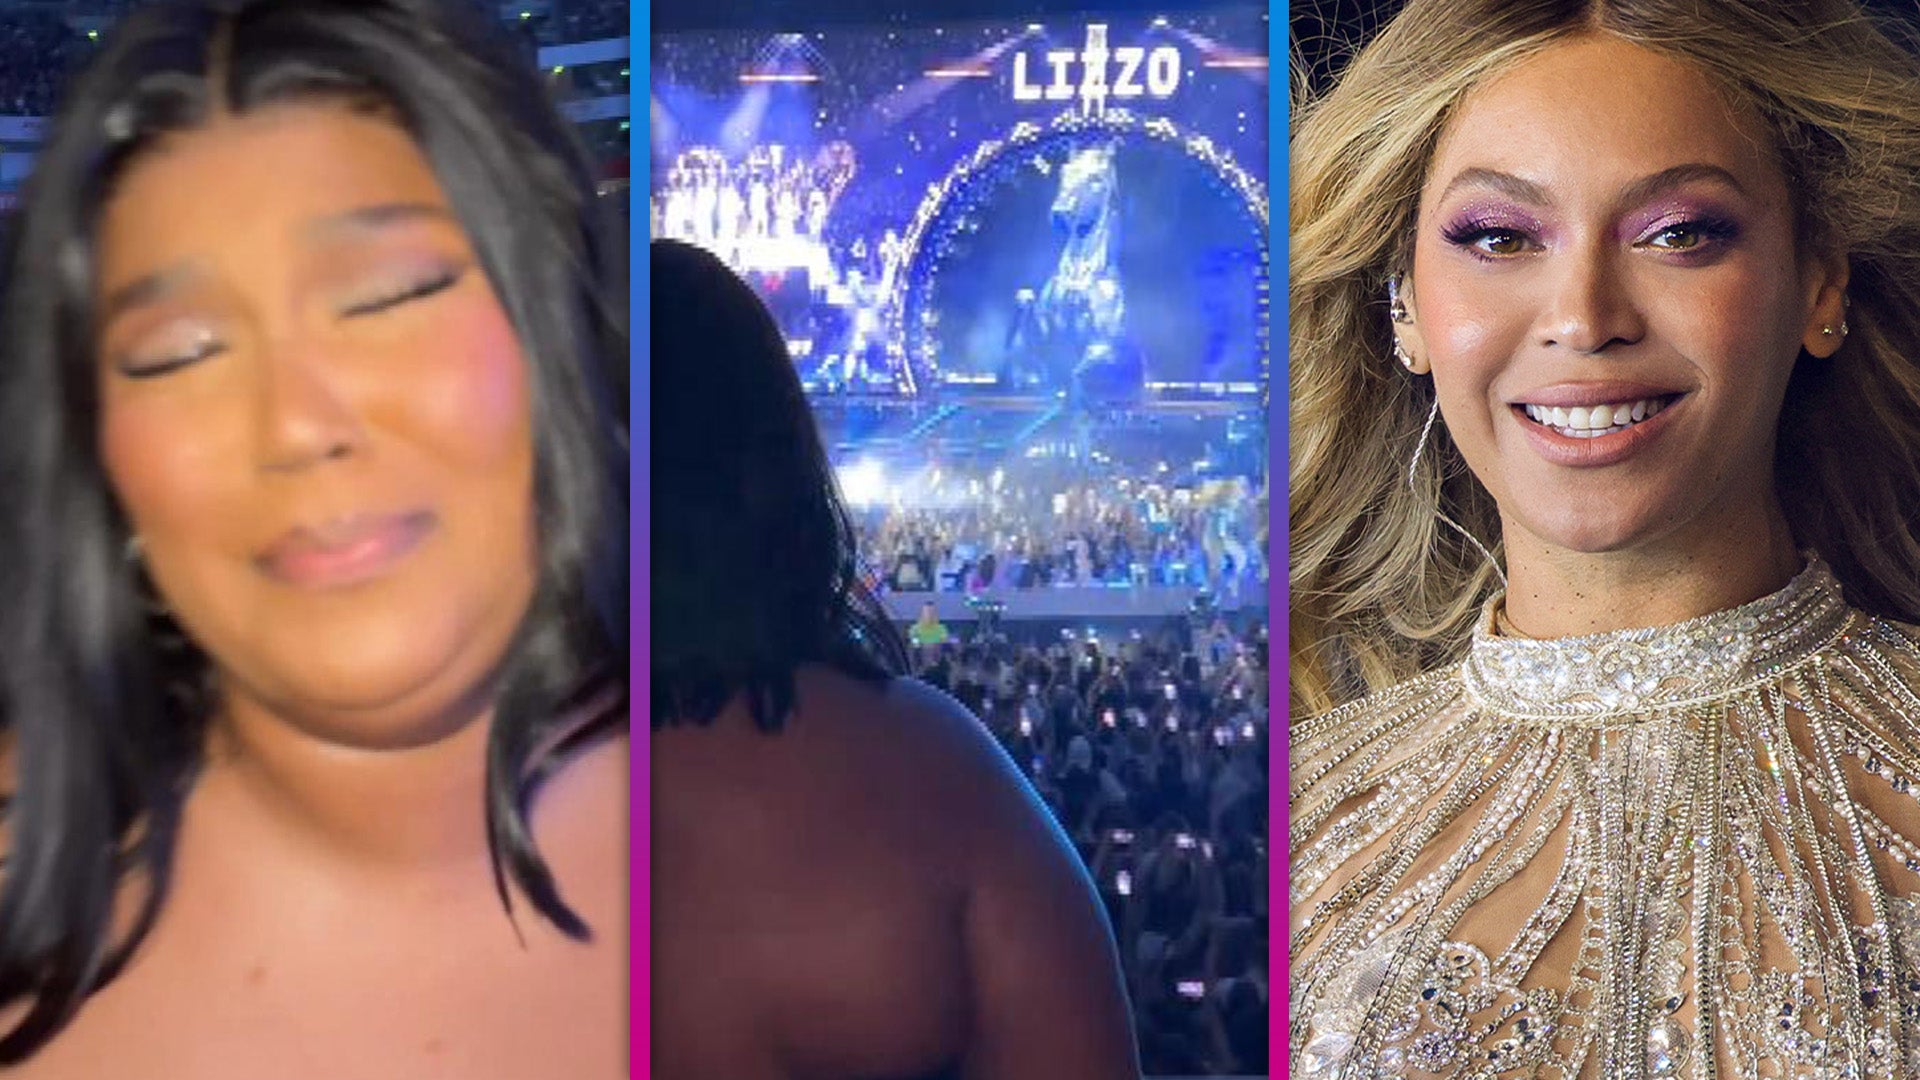 Watch Lizzo’s Tearful Reaction to Beyoncé Name Dropping Her During Renaissance Tour